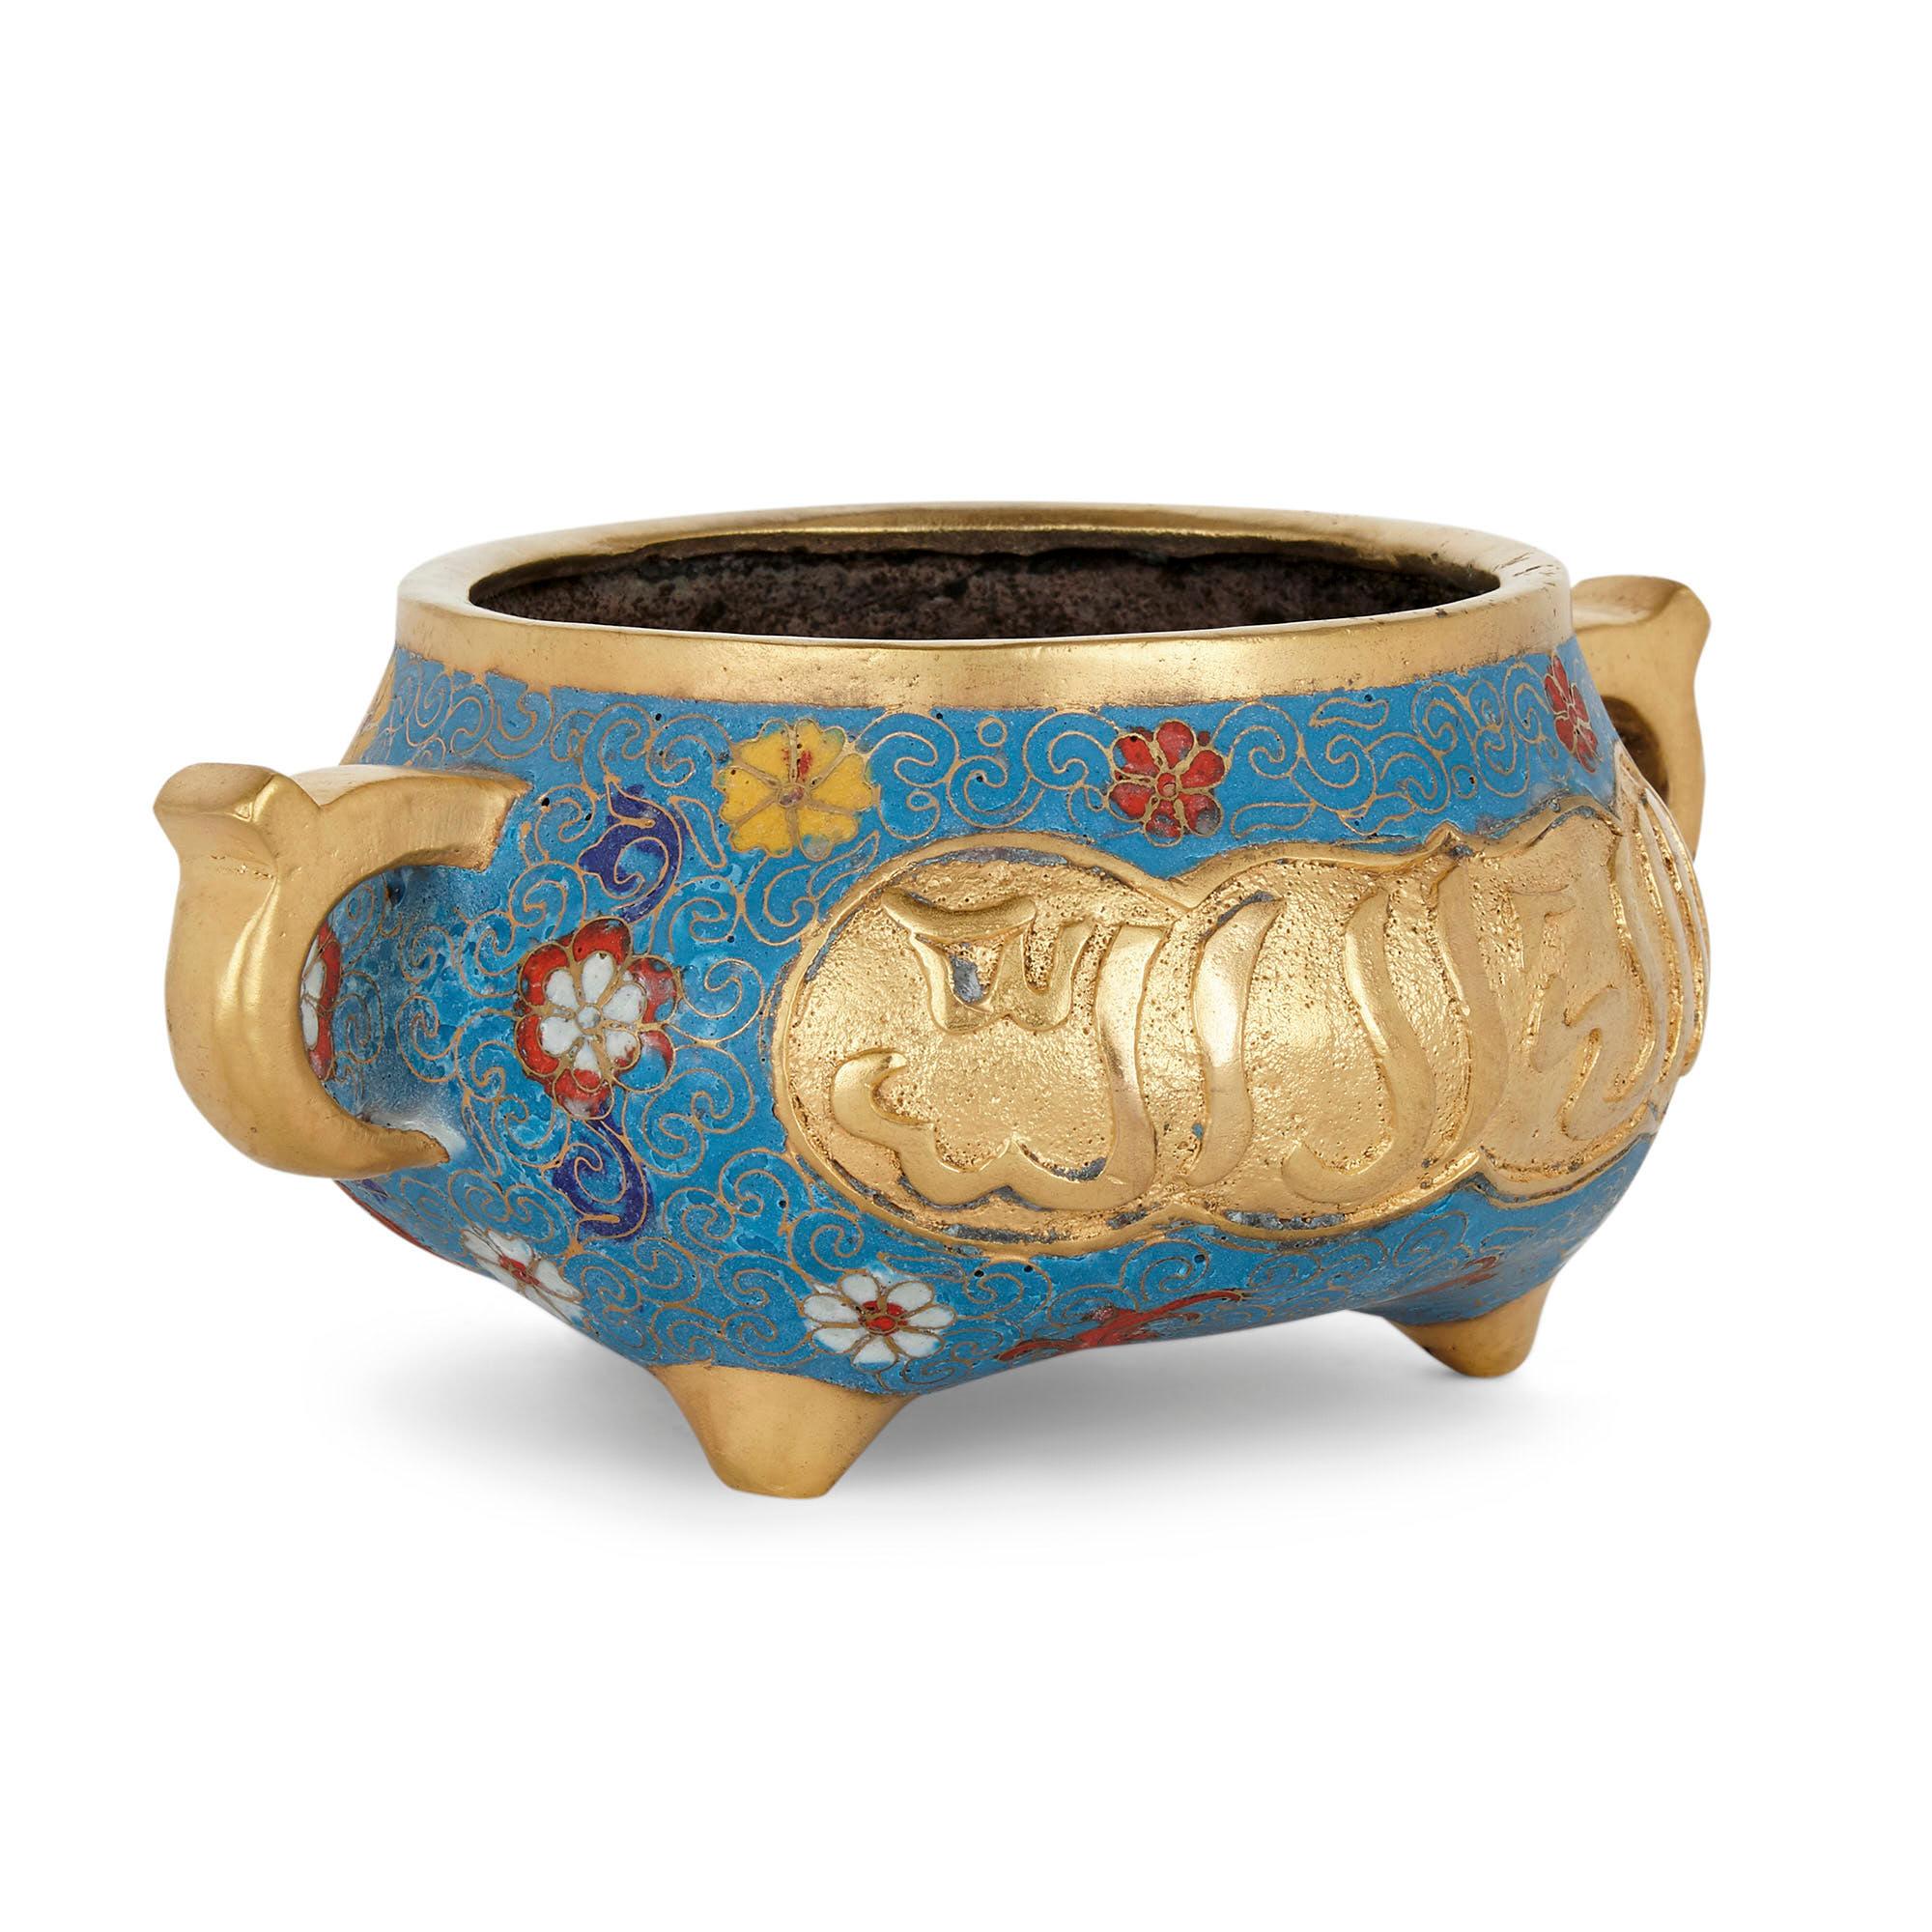 Chinese Export Antique Chinese Ormolu and Cloisonné Enamel Vase for the Islamic Market For Sale